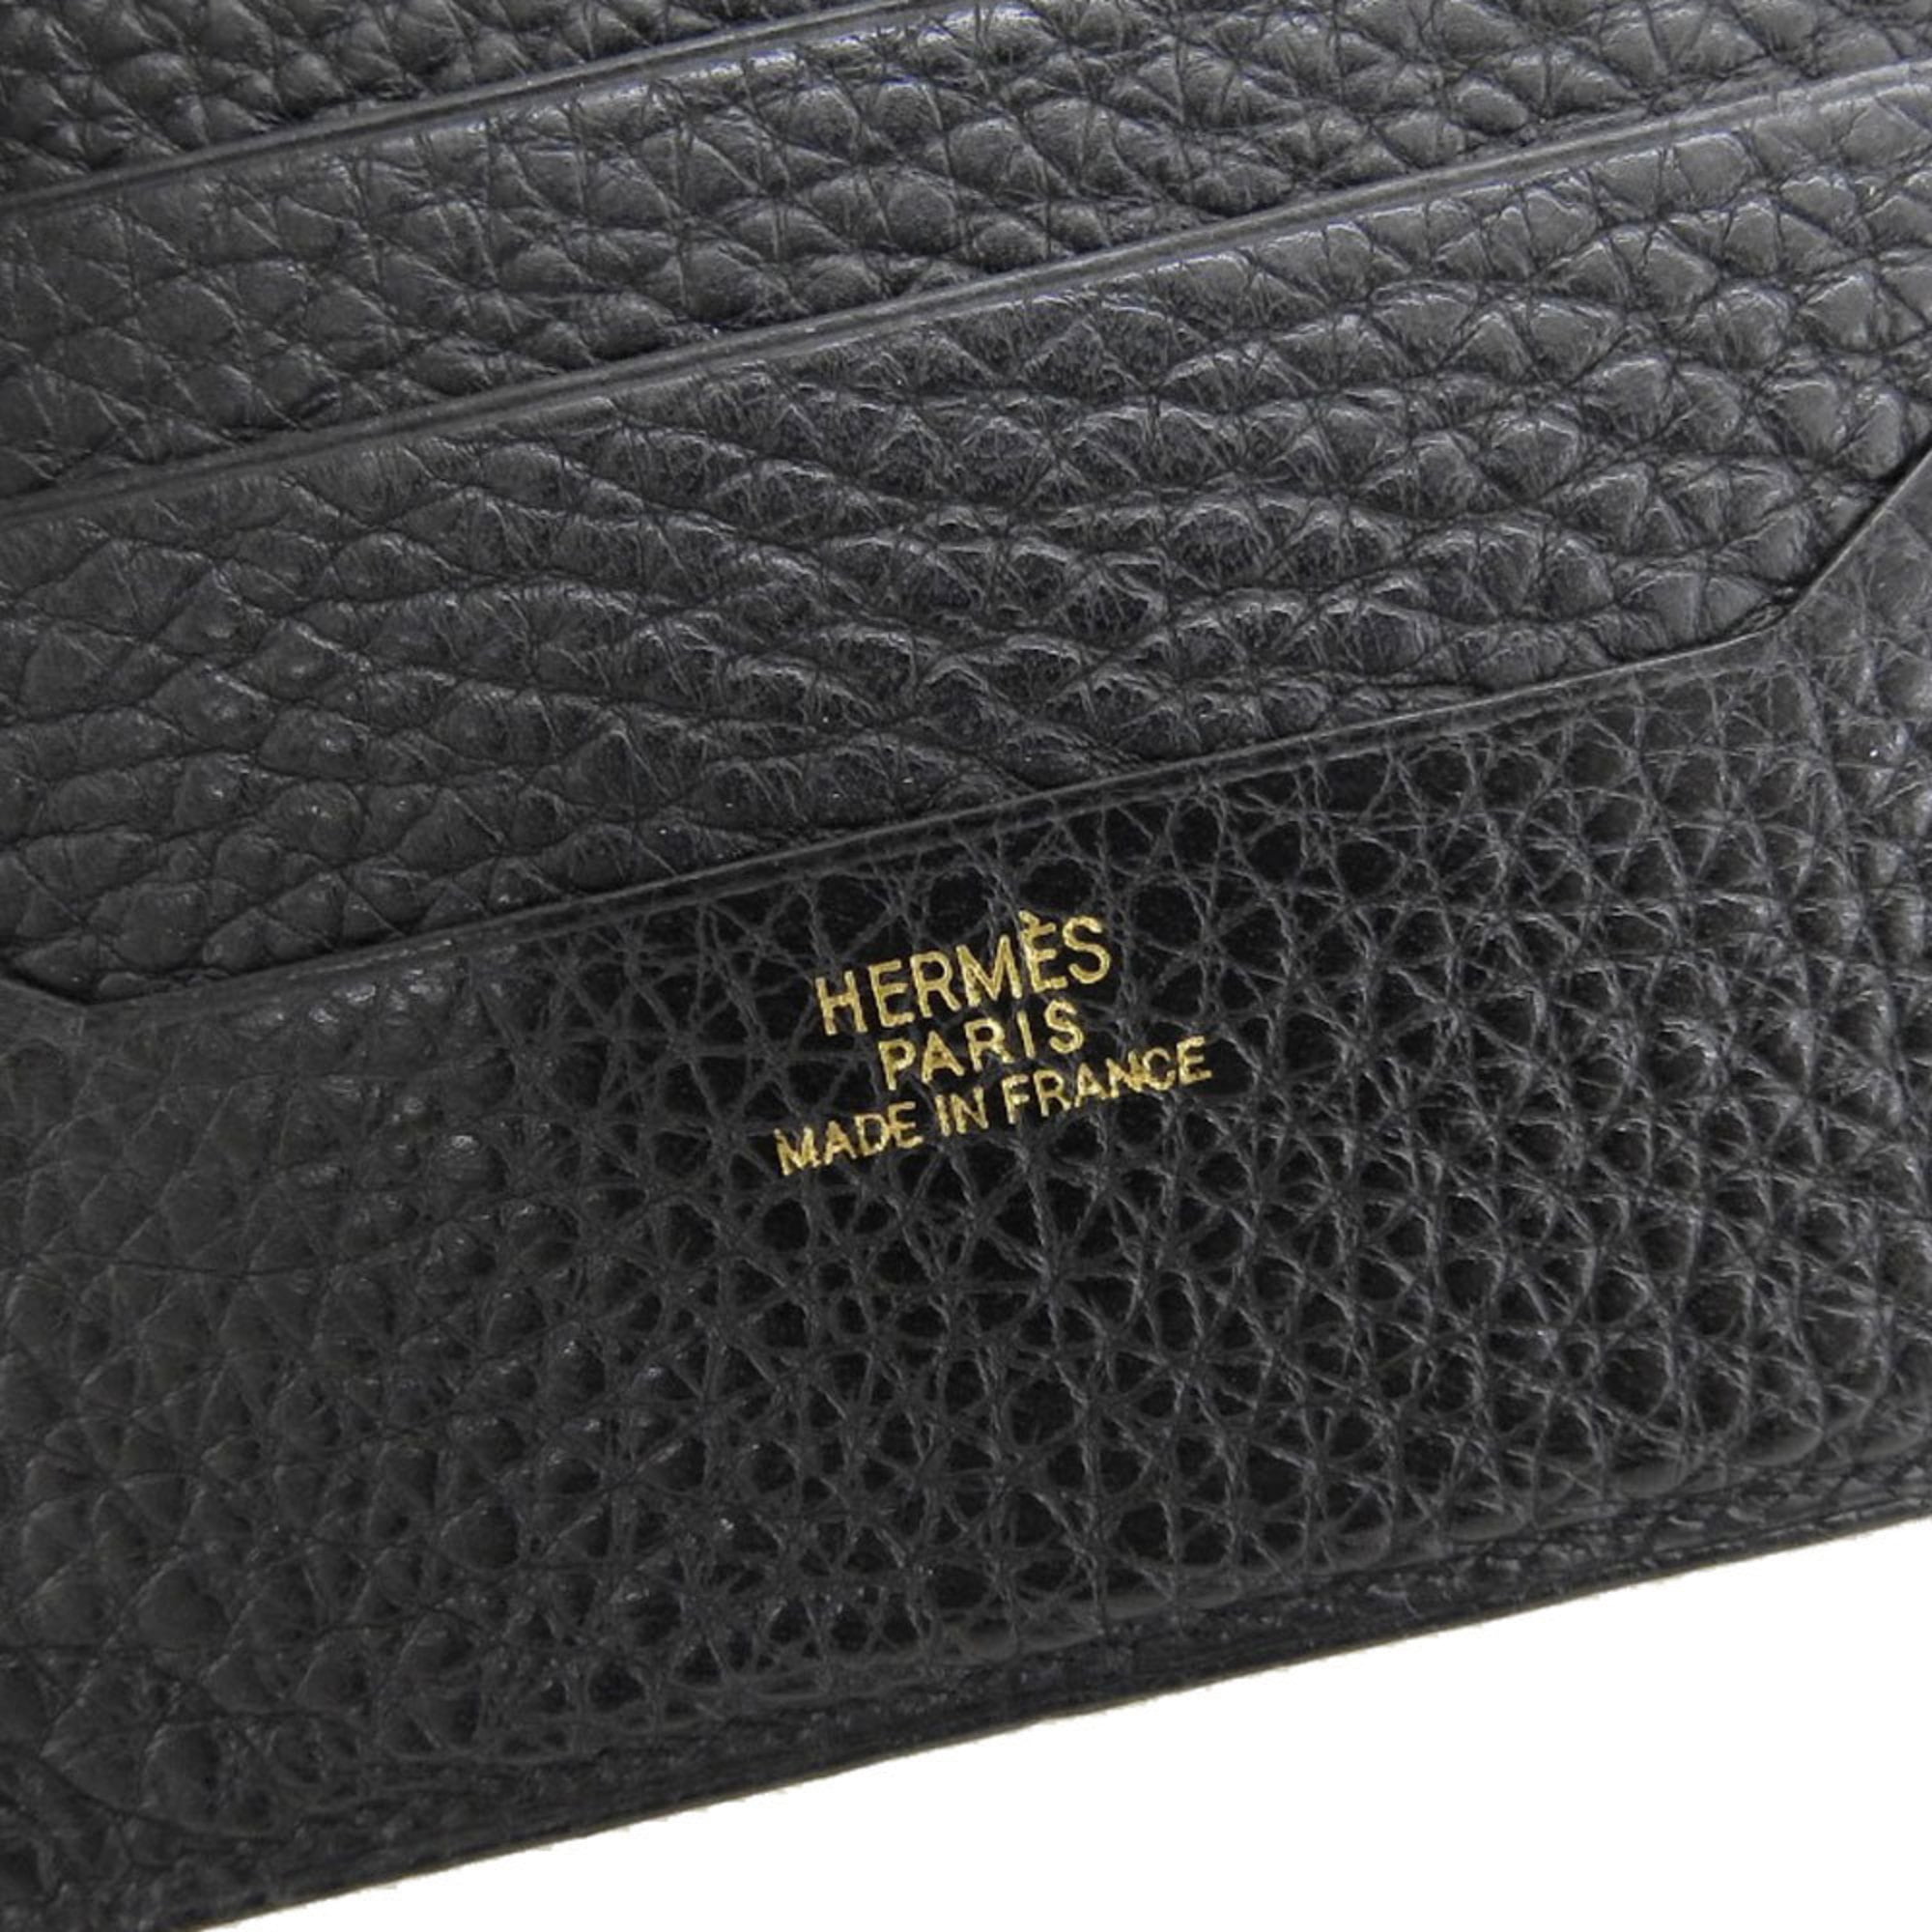 Authenticated Used Hermes Mens Bi-fold Wallet Taurillon Clemence